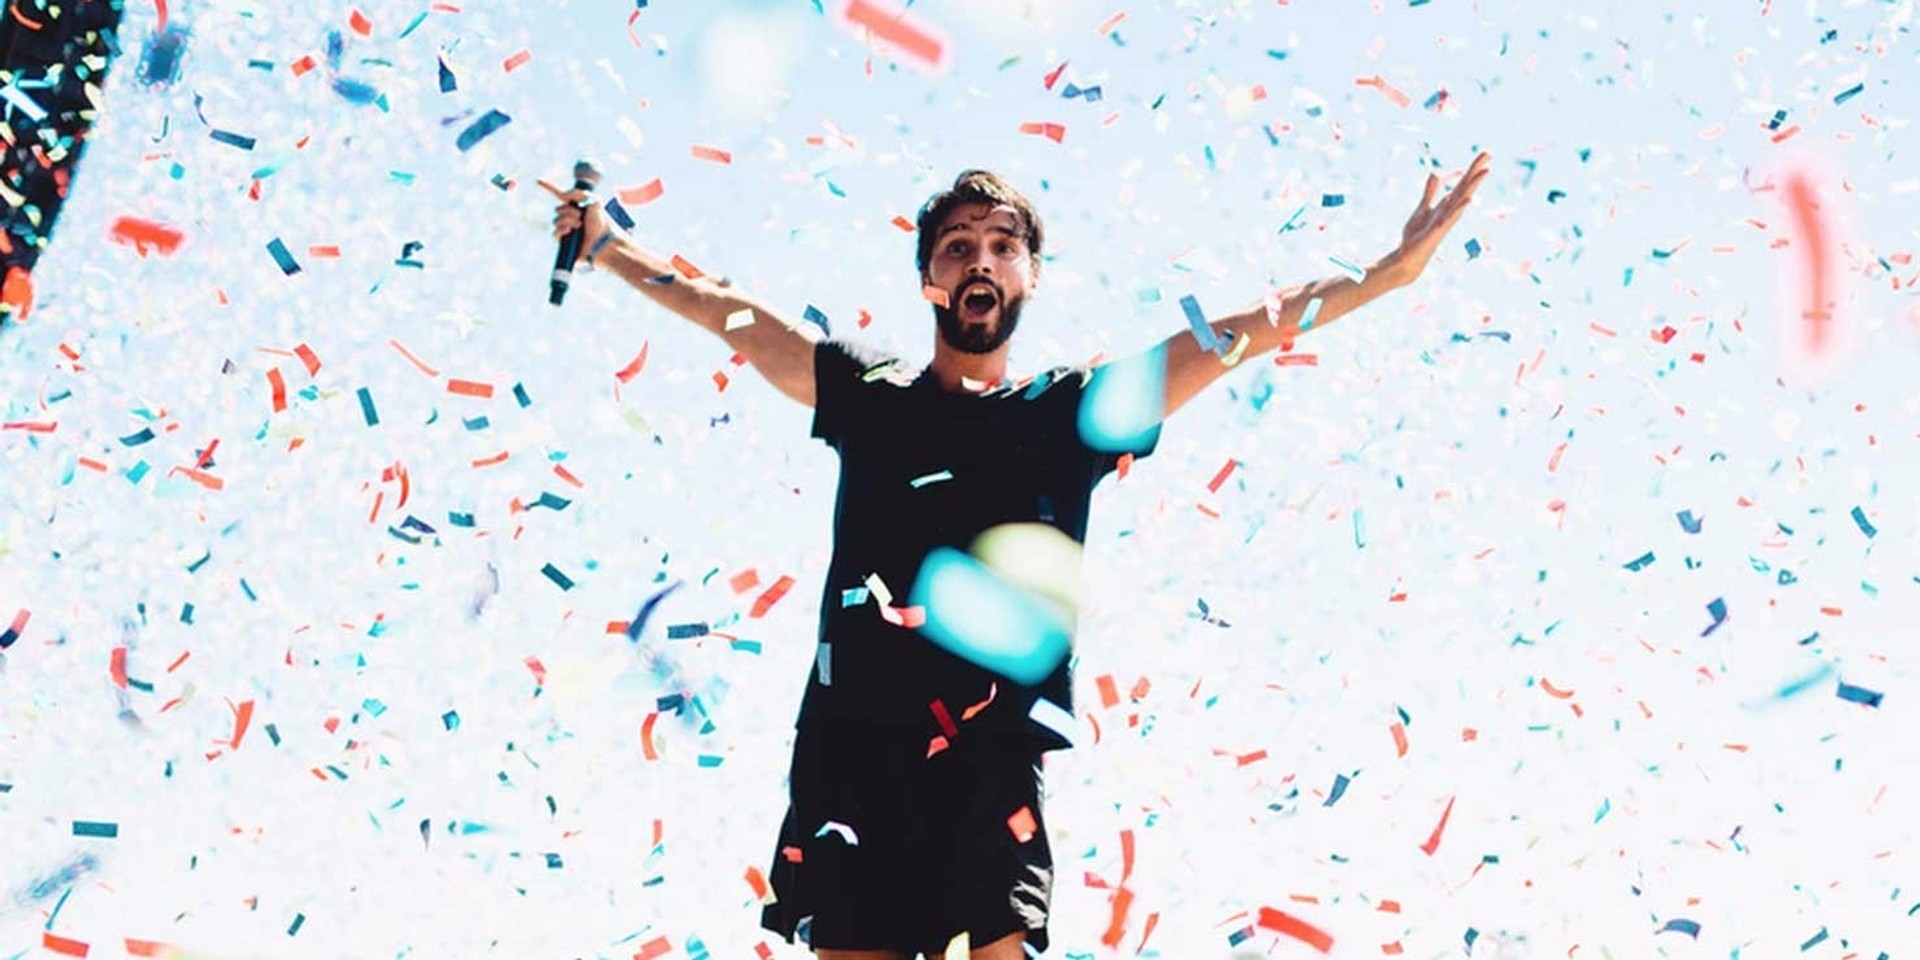 R3HAB: "I love the melting pot of cultures in Singapore"